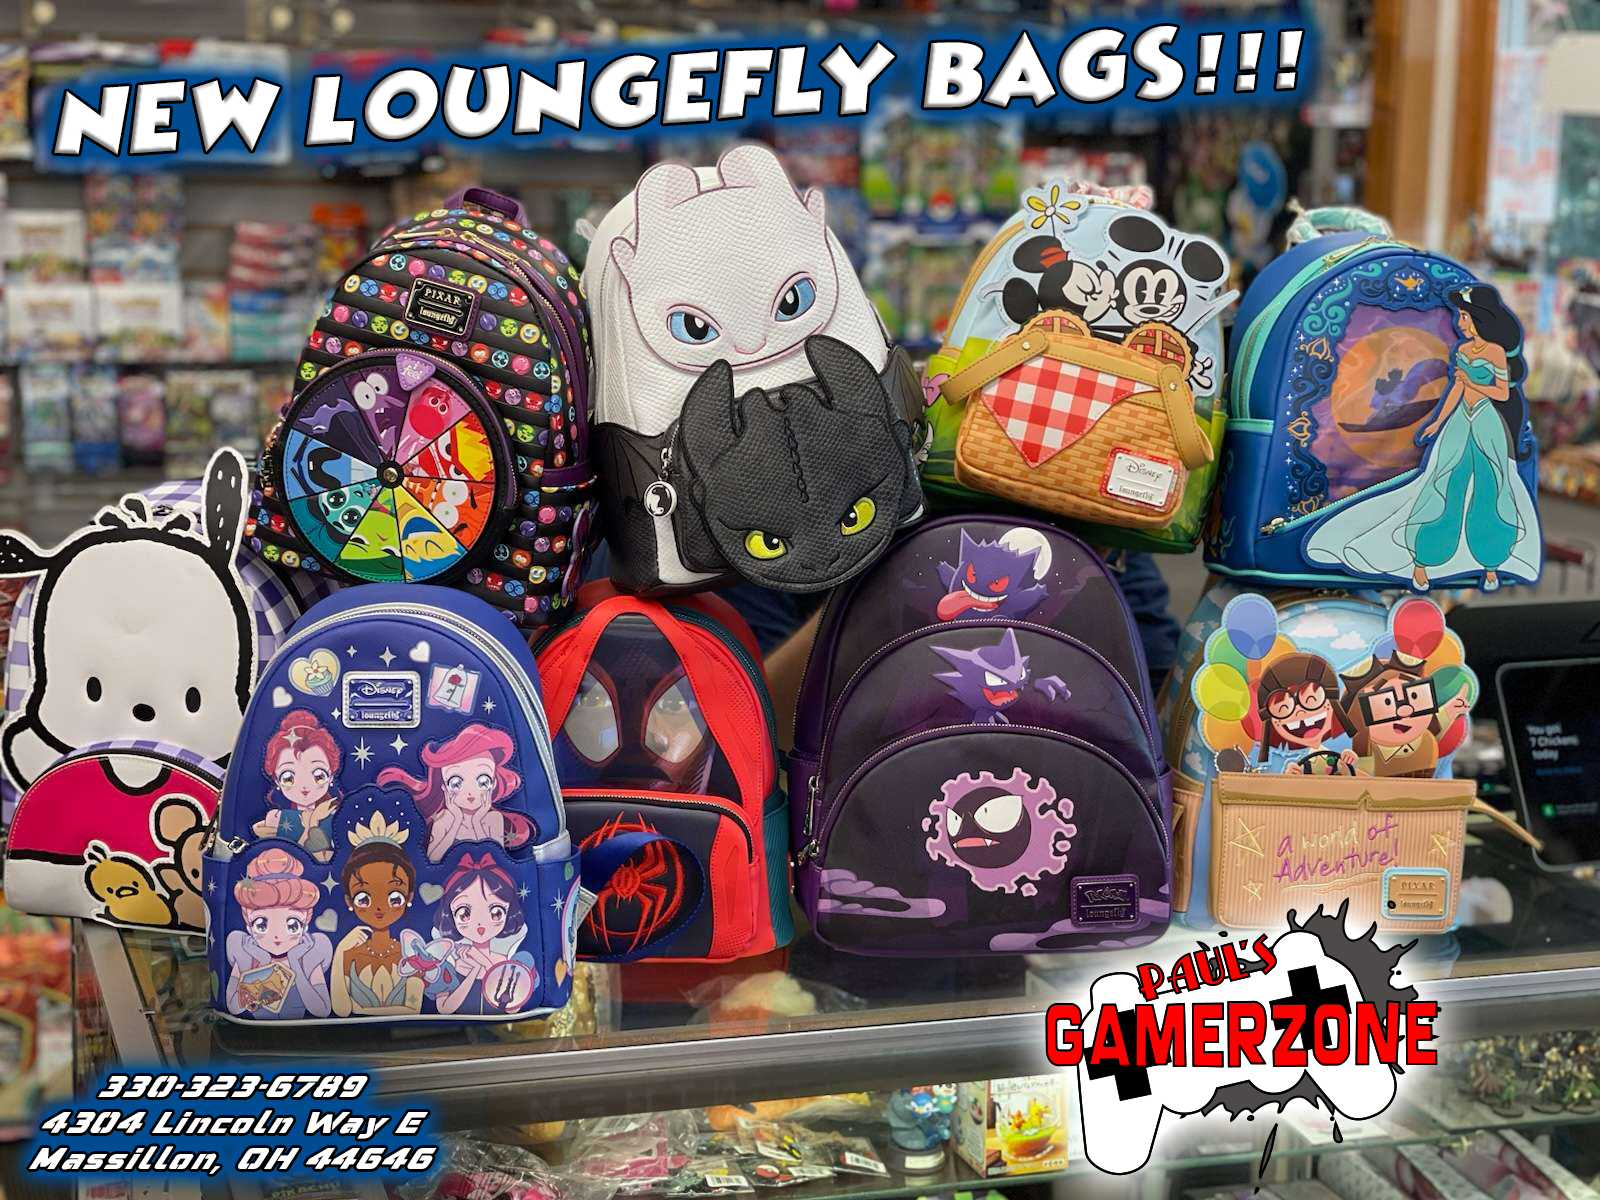 New Loungefly Bags!